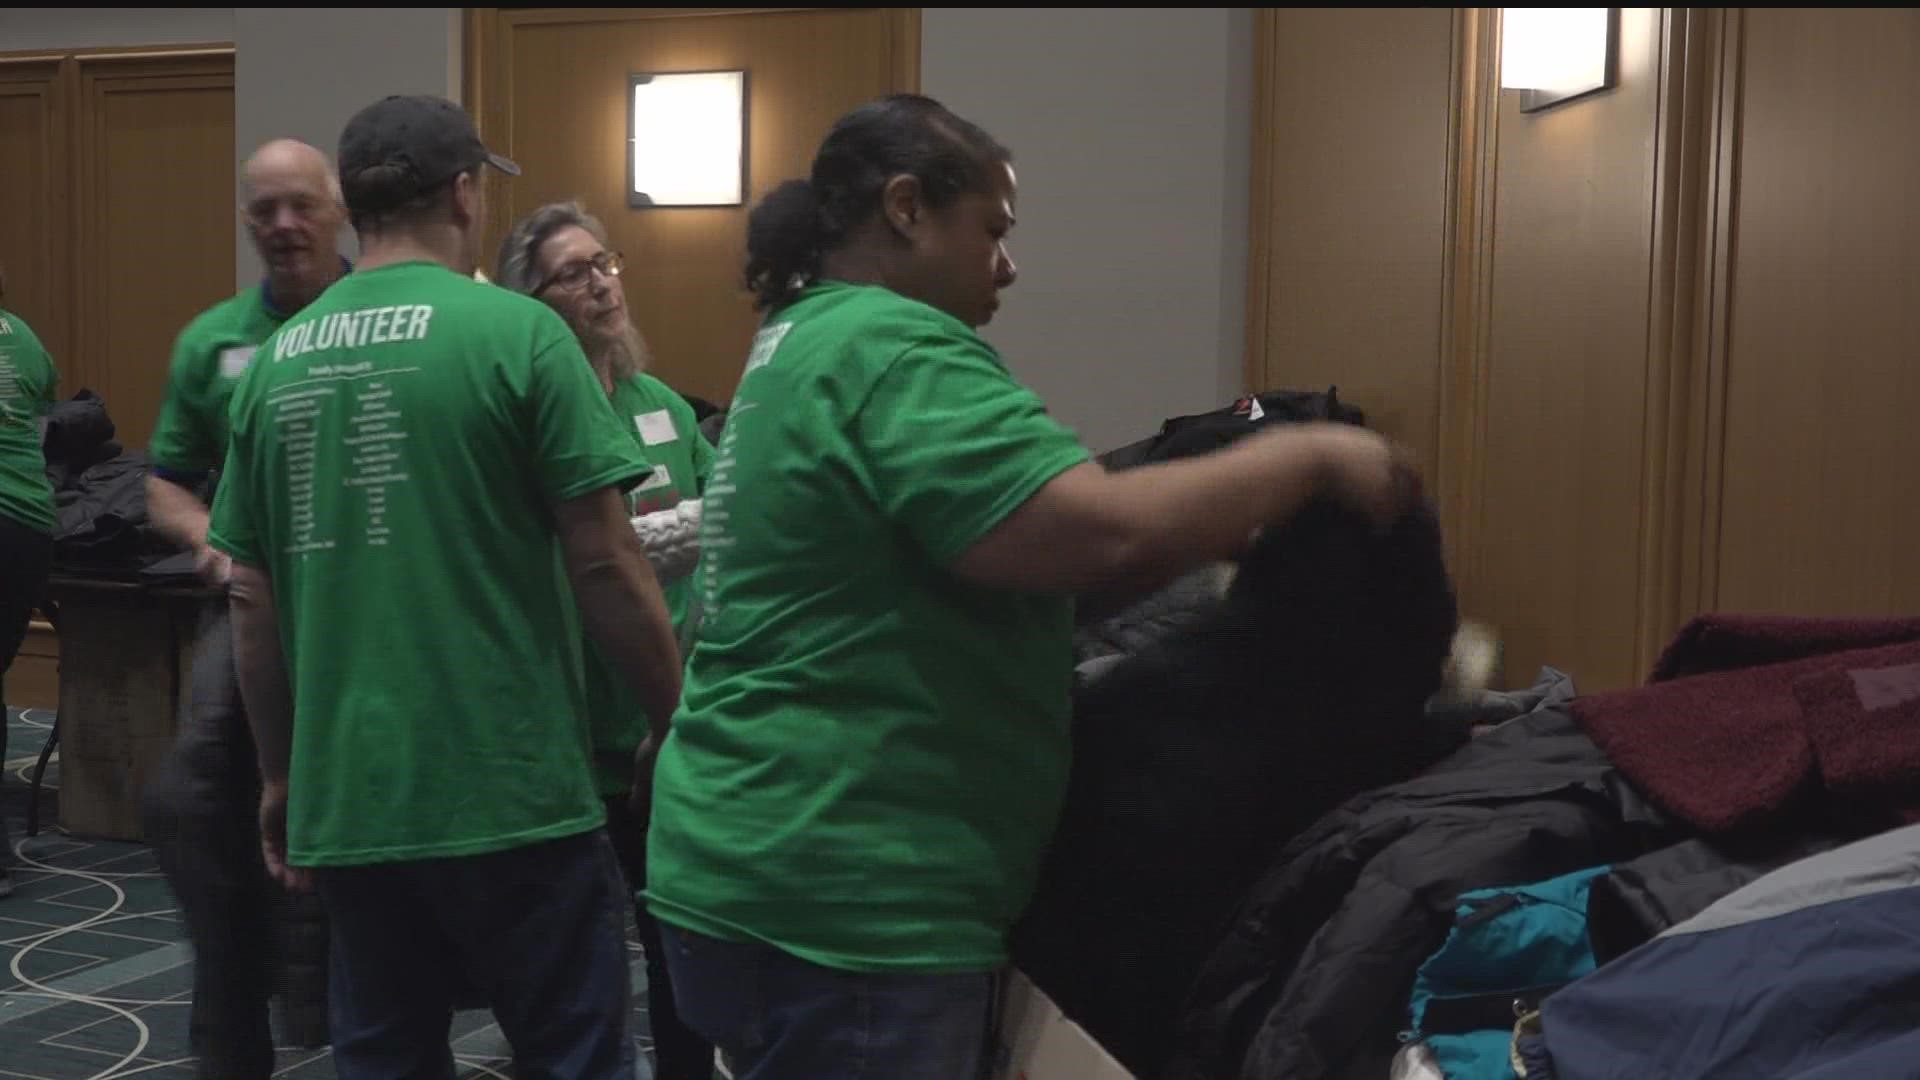 Coated in Love's goal is to provide a day of hope to 3,000 unhoused people in the Twin Cities with a meal, haircut, winter necessities and access to social services.